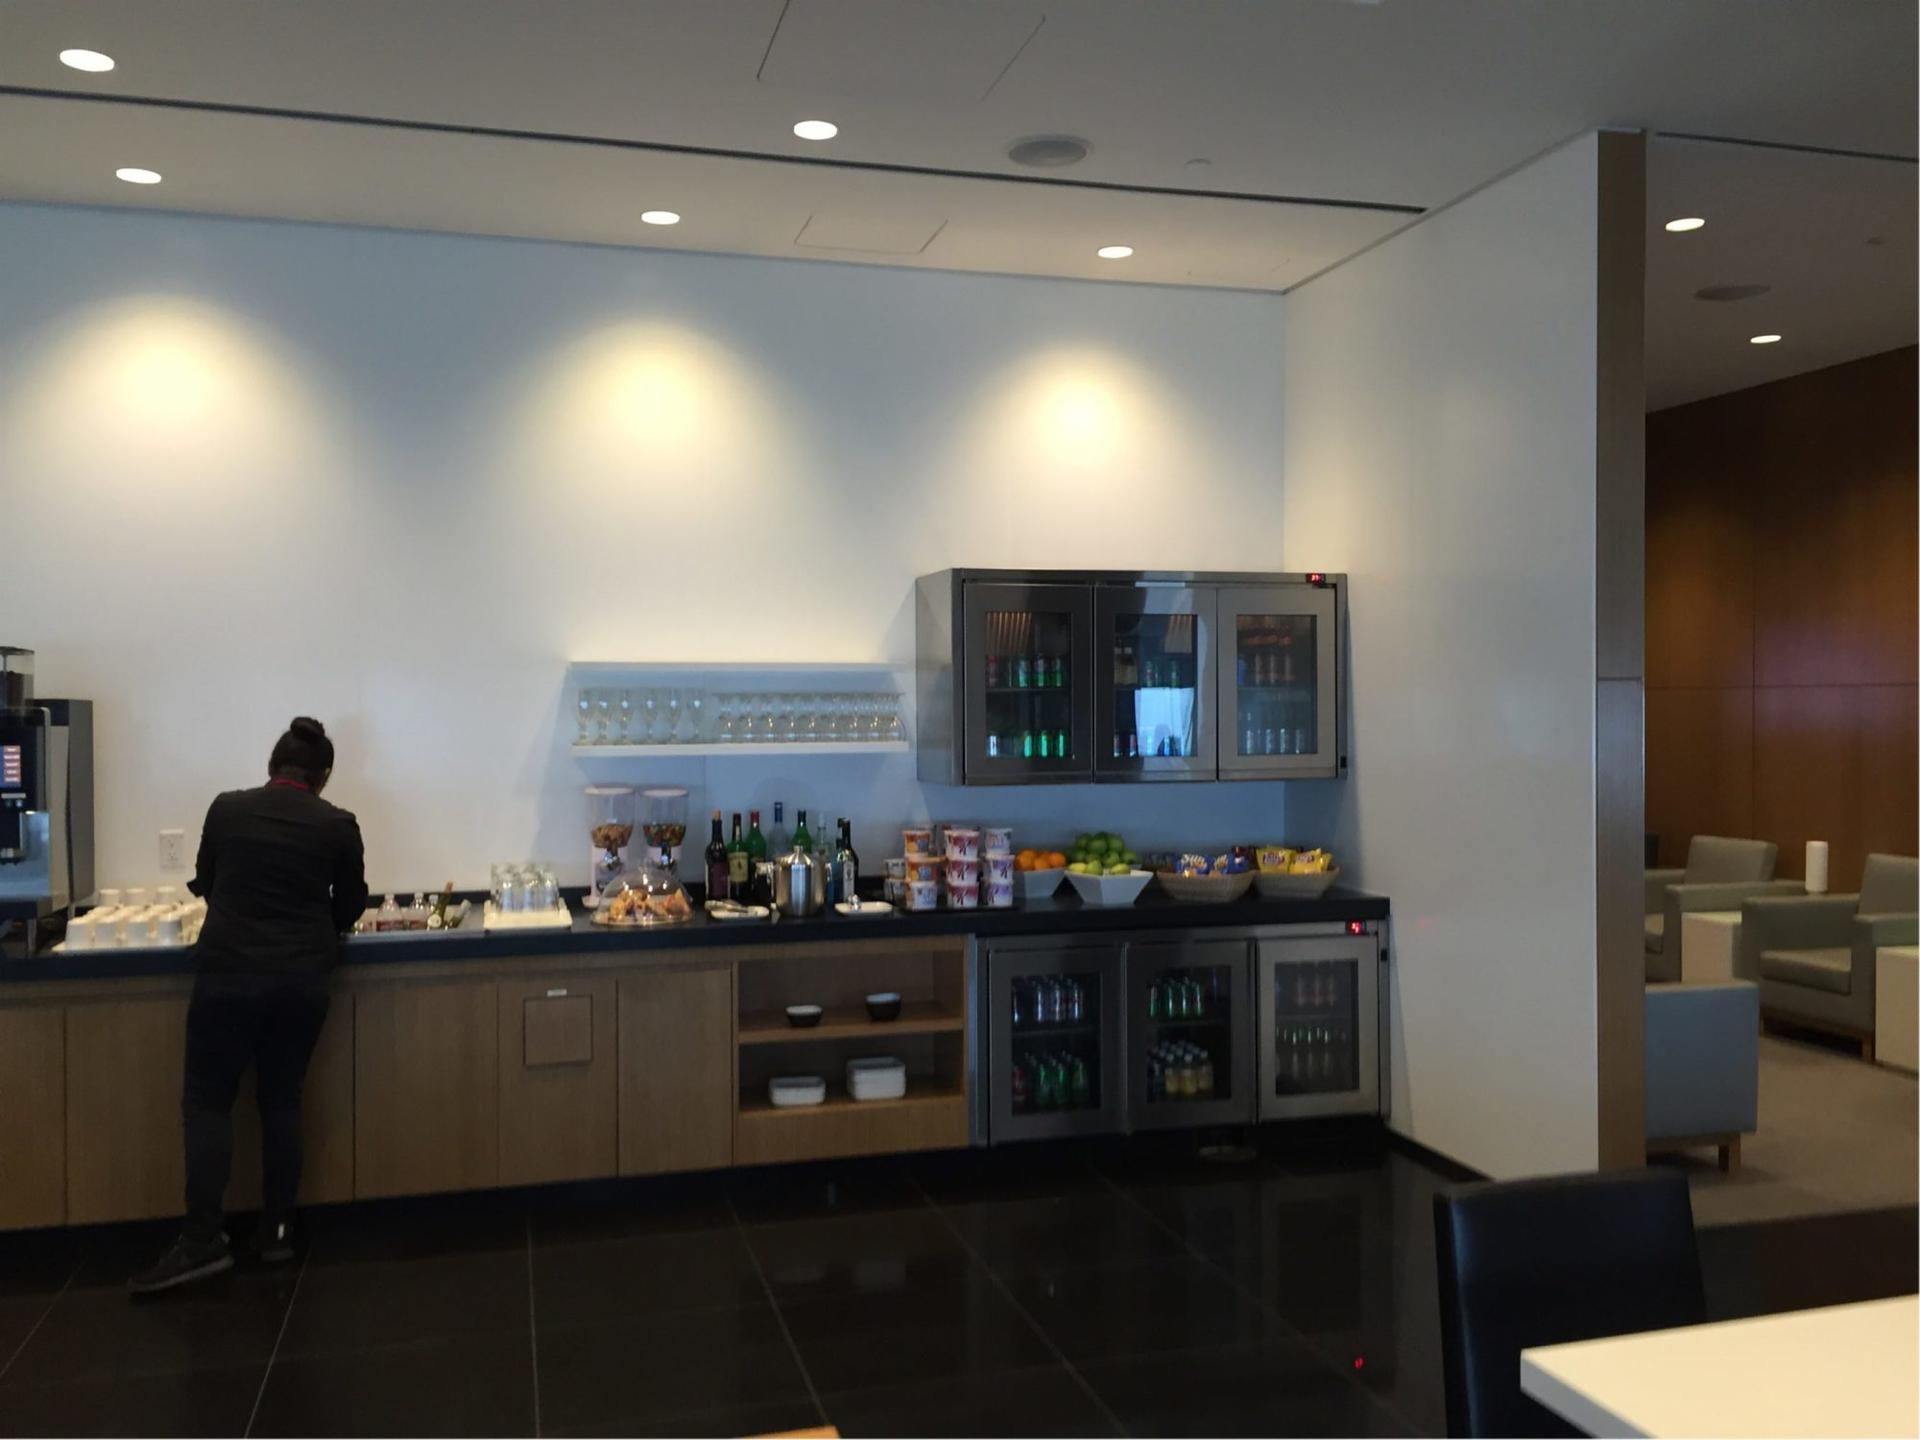 Cathay Pacific First and Business Class Lounge image 13 of 74